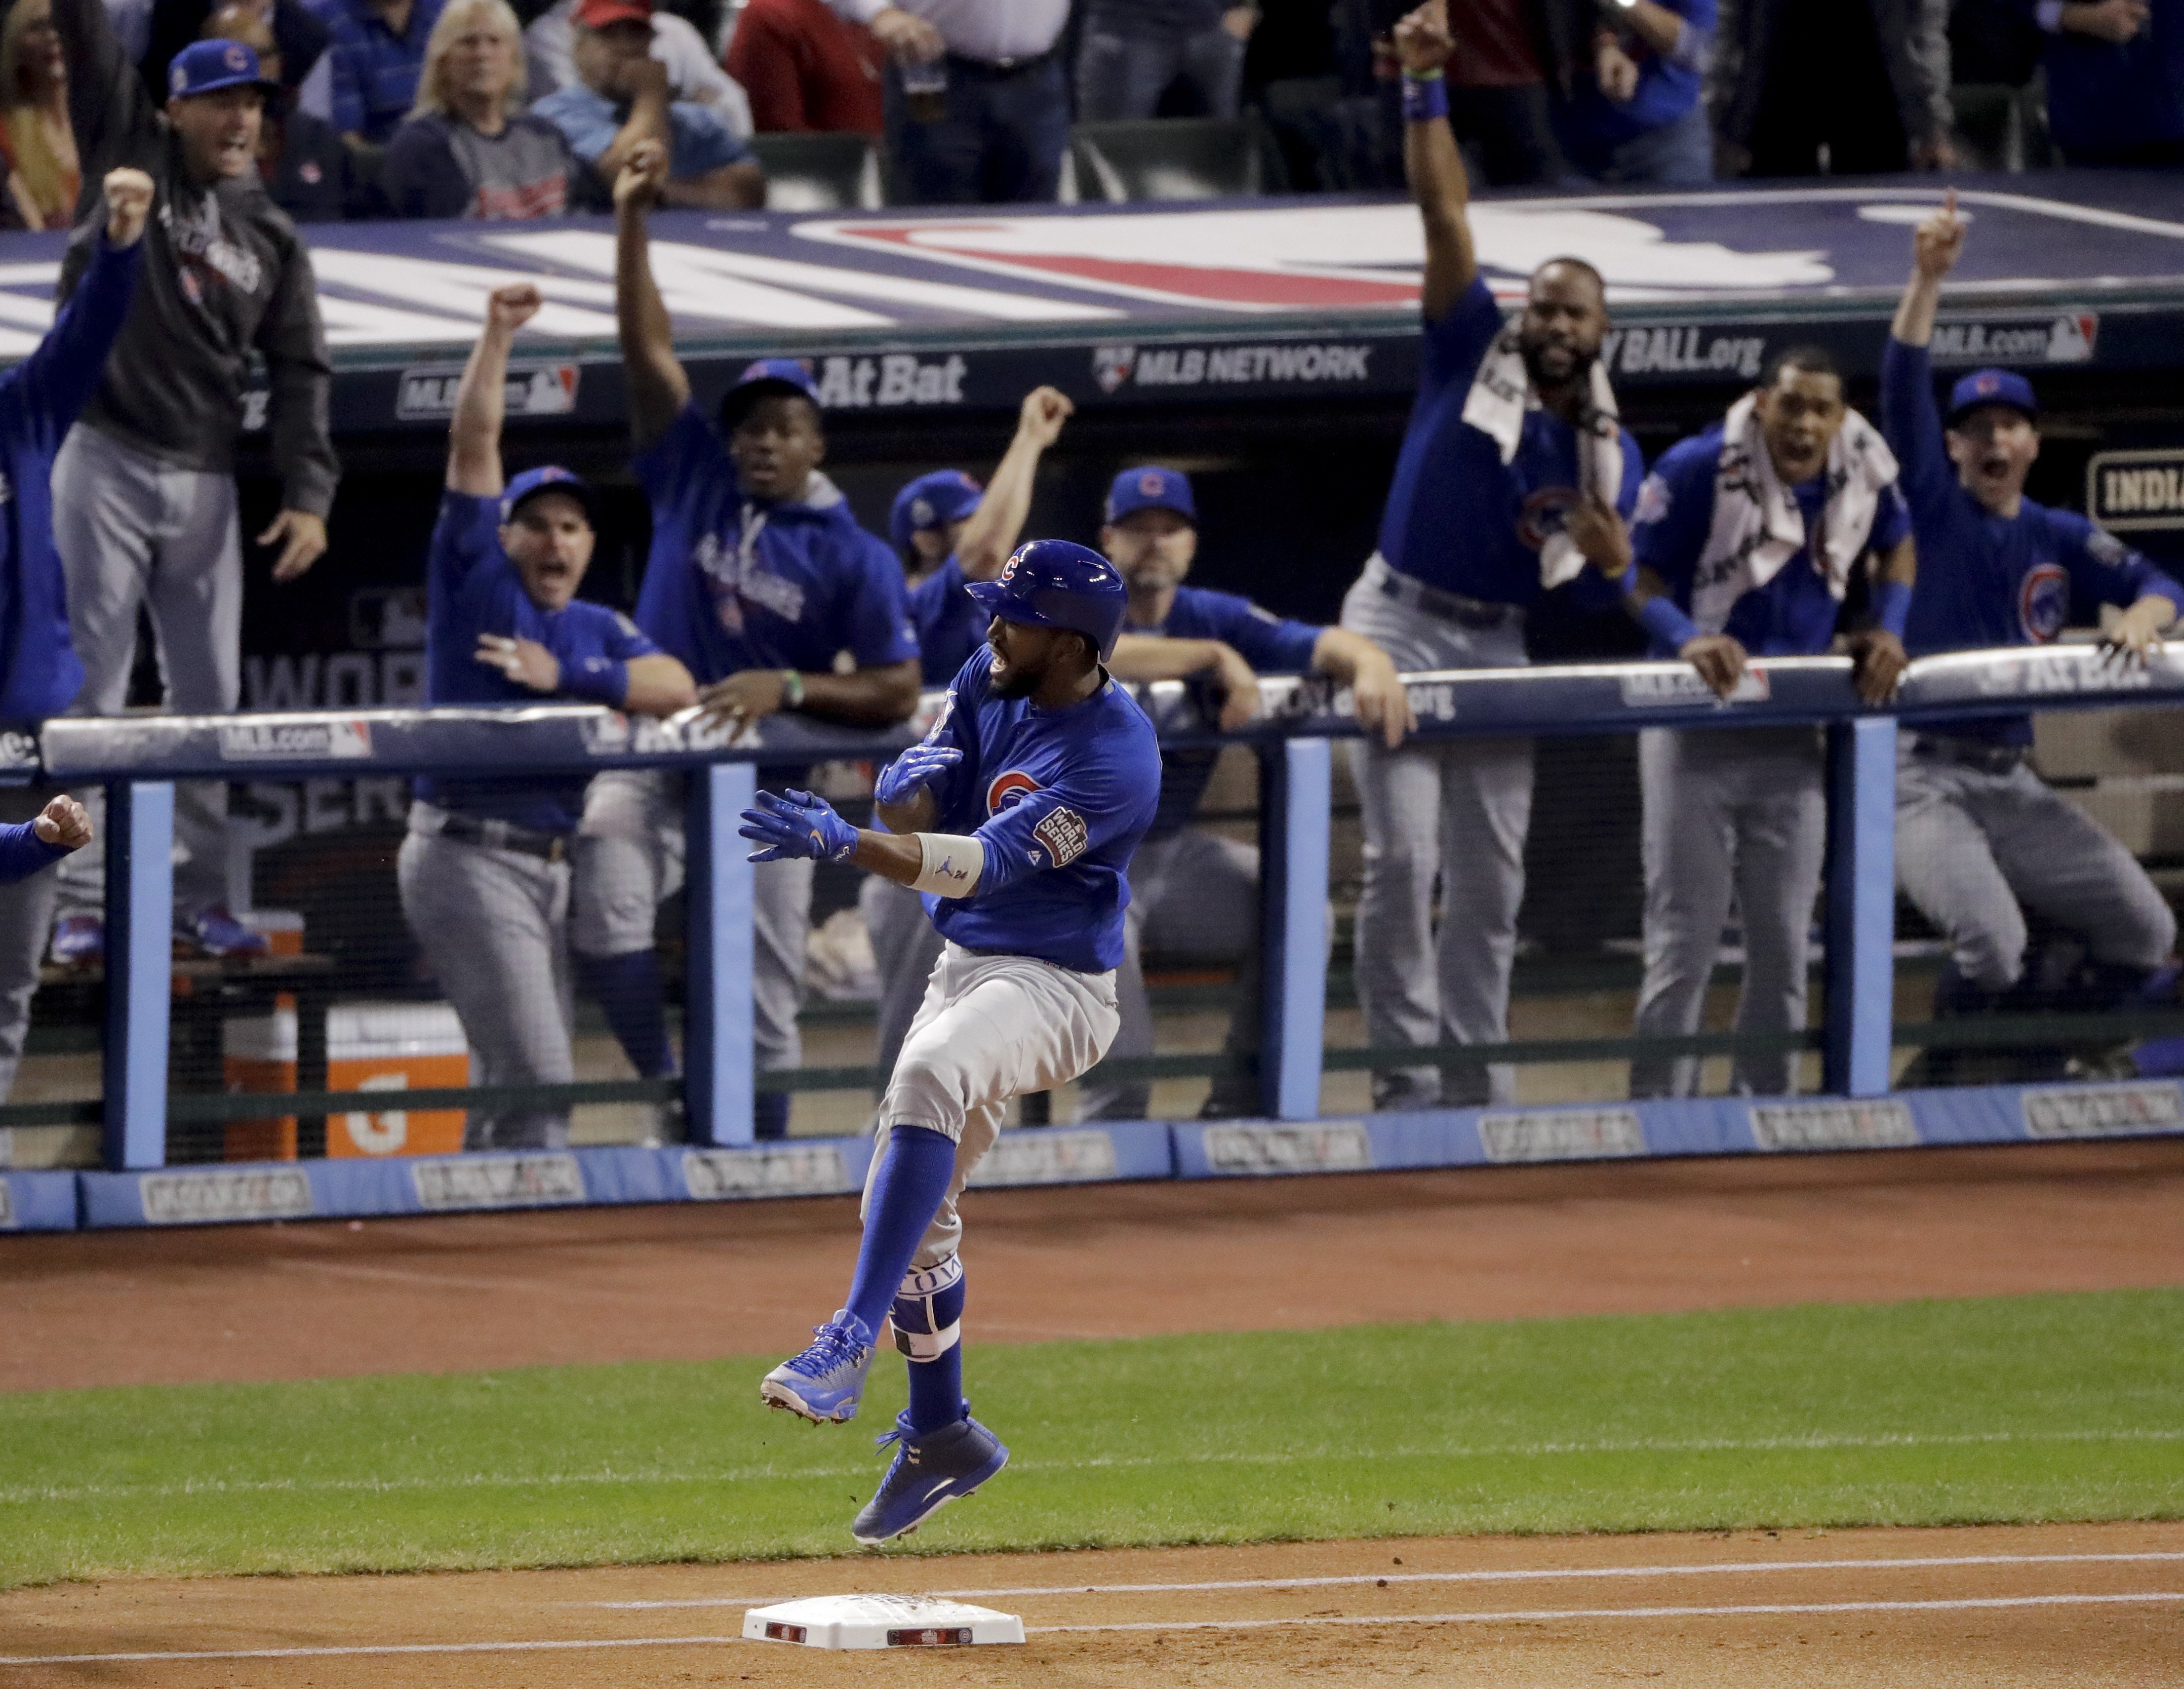 Chicago Cubs' Dexter Fowler celebrates after a leadoff home run against the Cleveland Indians during the first inning of Game 7 of the Major League Baseball World Series Wednesday, Nov. 2, 2016, in Cleveland. (Charlie Riedel—AP)